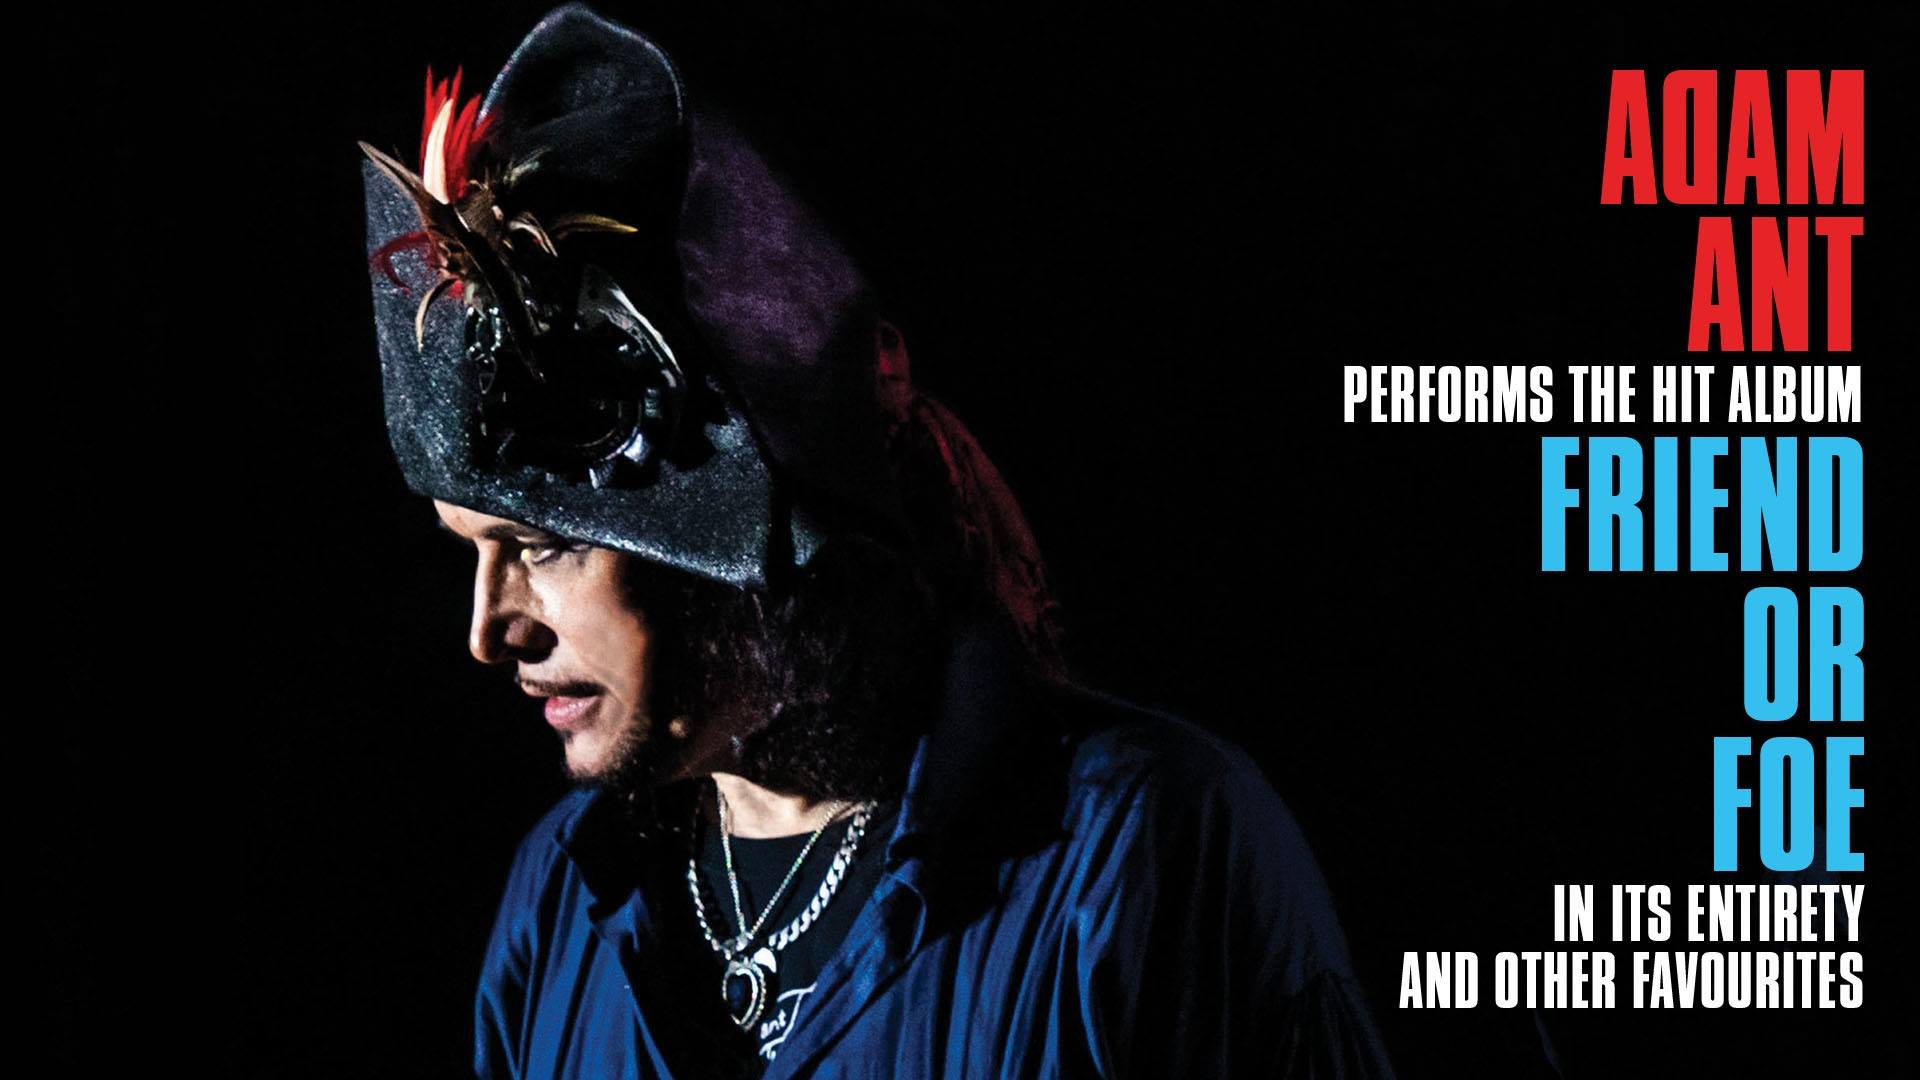  Adam Ant ‘Friend or Foe’ tour coming to Liverpool